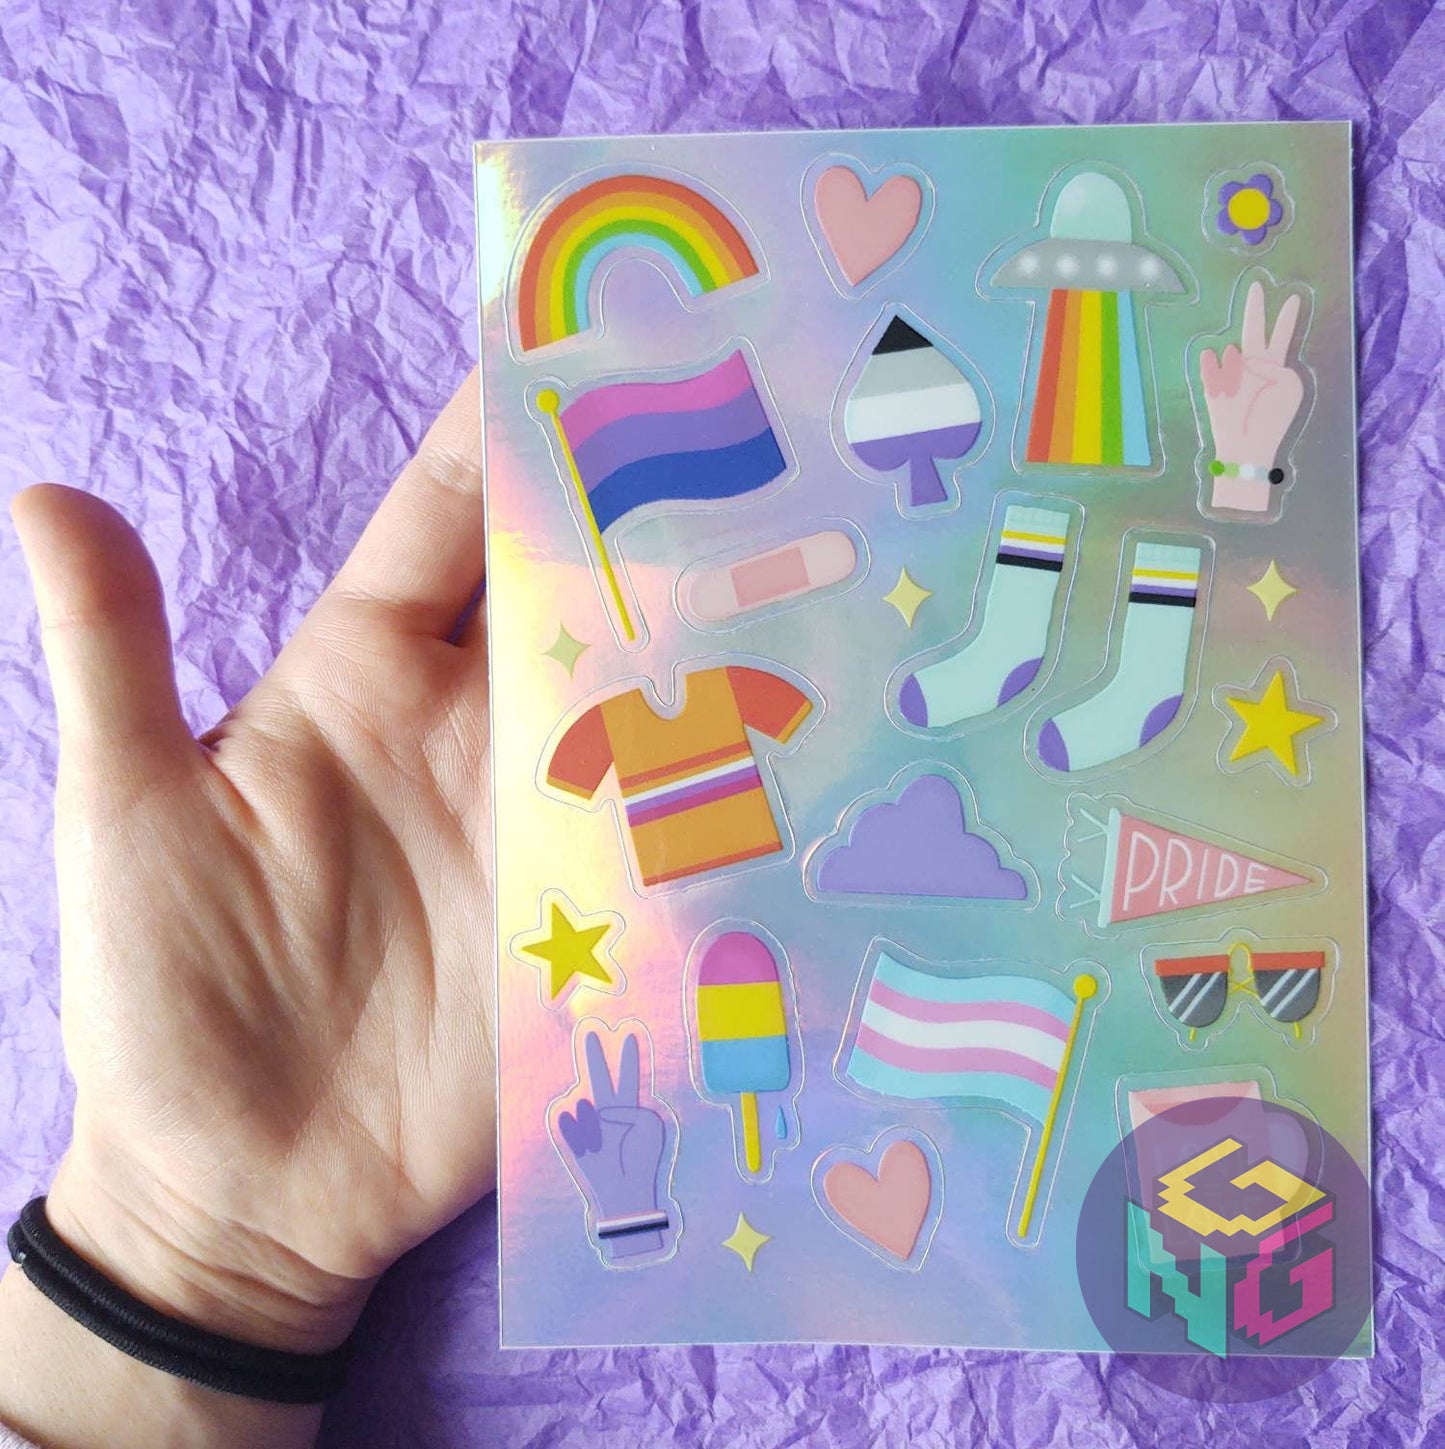 andyrogyny and gay nerd goods rainbow holographic sticker sheet with over twenty tiny pride stickers held by a hand on purple background